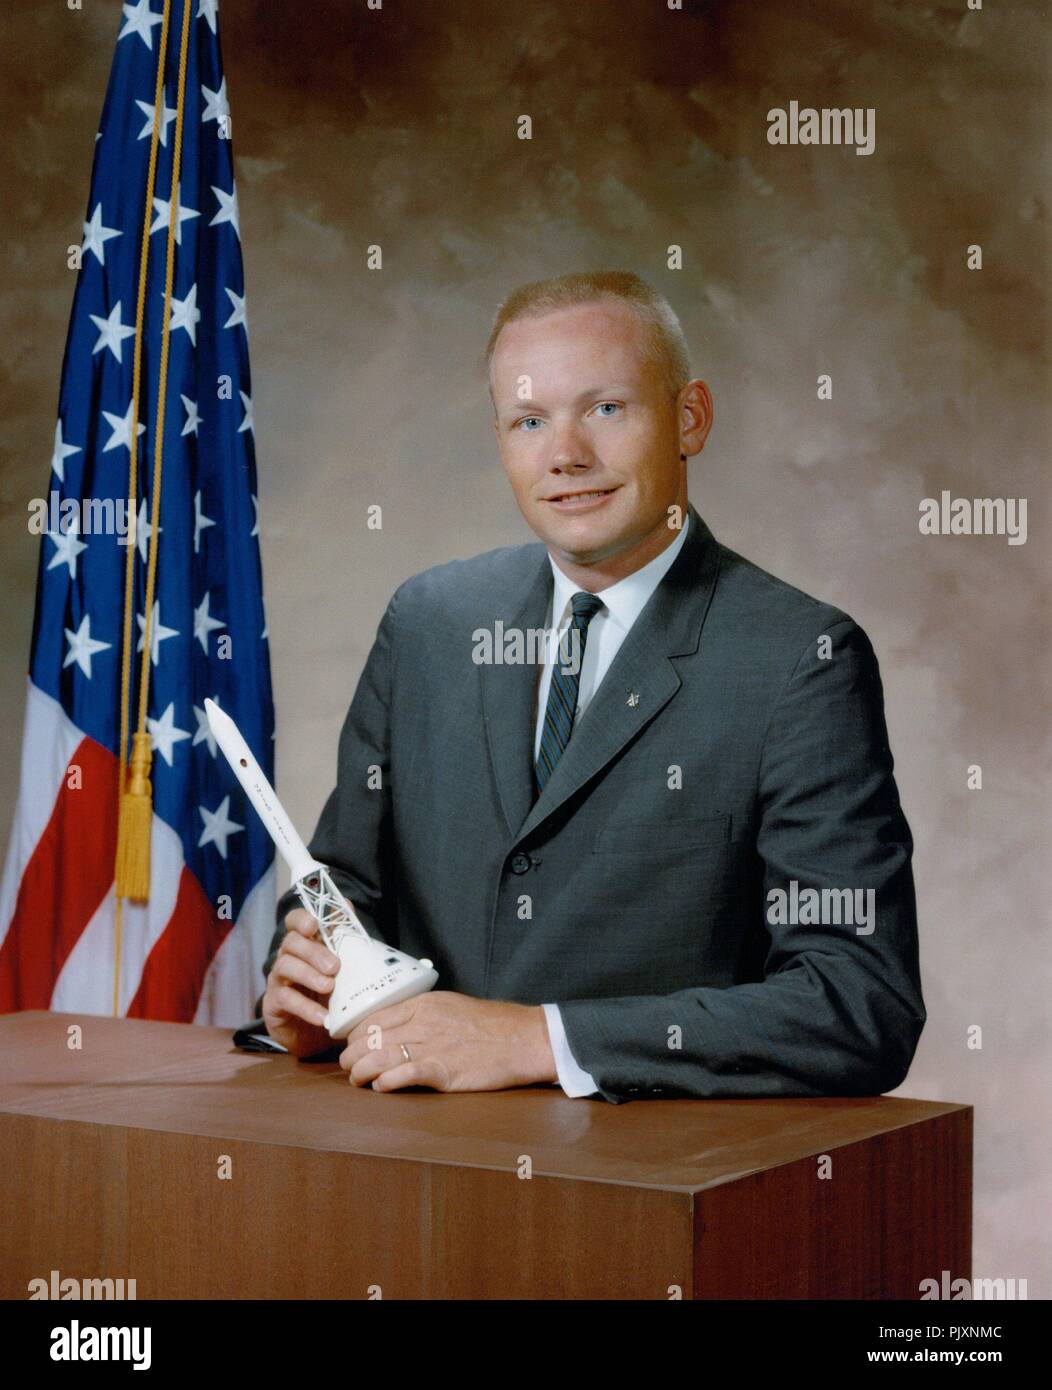 Houston, TX - File photo -- Early portrait of Neil A. Armstrong, Commander of Apollo 11 Lunar Landing Mission taken in 1964.  Apollo 11 was Armstrong's second and final trip to space.  He previously commanded the Gemini 8 mission on March 16, 1966.  That mission performed the first successful docking of two vehicles in space.  Apollo 11 launched on July 16, 1969.  On July 20, 1969 Armstrong became the first human to set foot on the Moon. Credit: NASA via CNP /MediaPunch Stock Photo